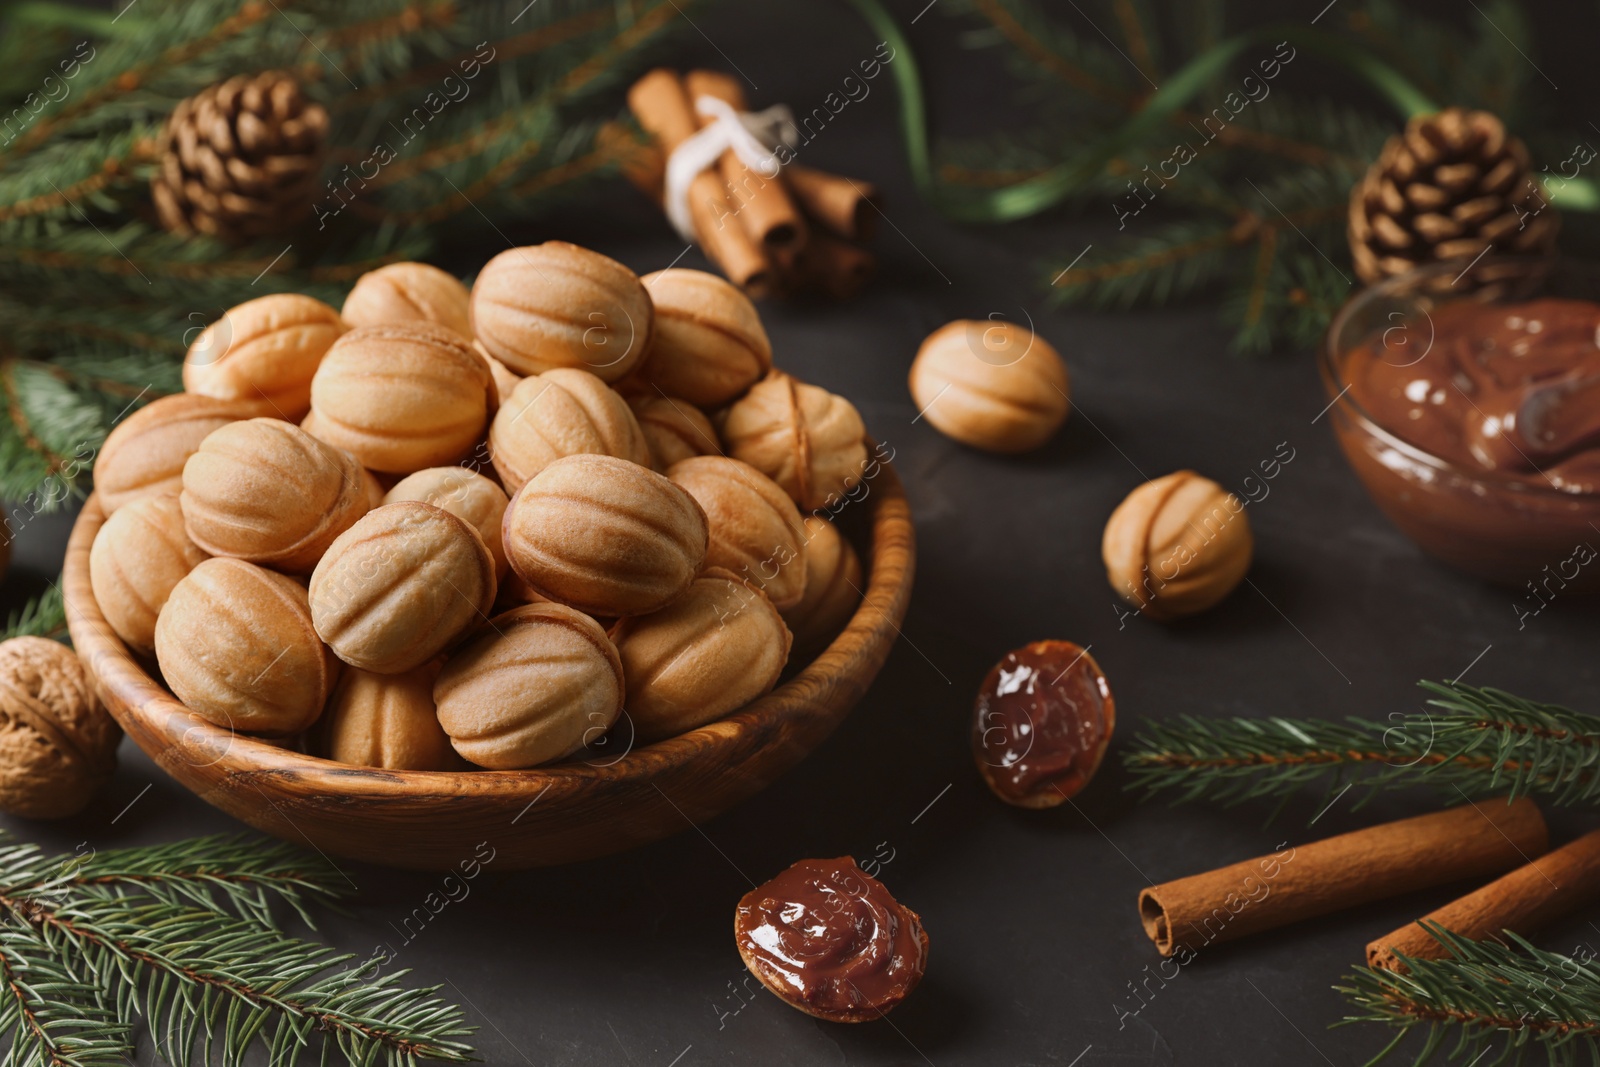 Photo of Homemade walnut shaped cookies with boiled condensed milk, cinnamon sticks and fir branches on black table